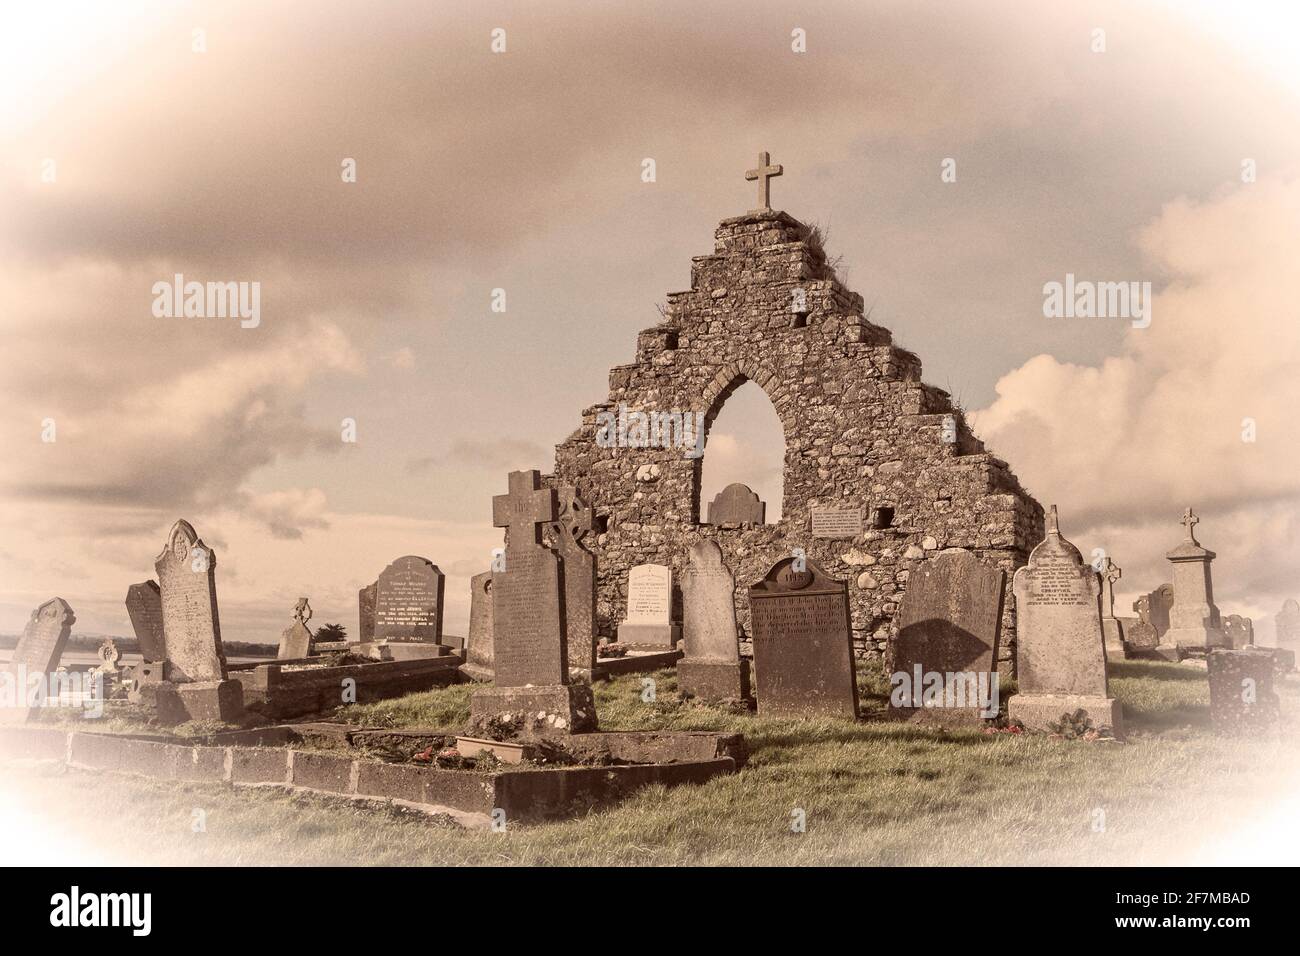 The old cemetery at Rush, Dublin, Ireland with the remains of an ancient church still standing Stock Photo